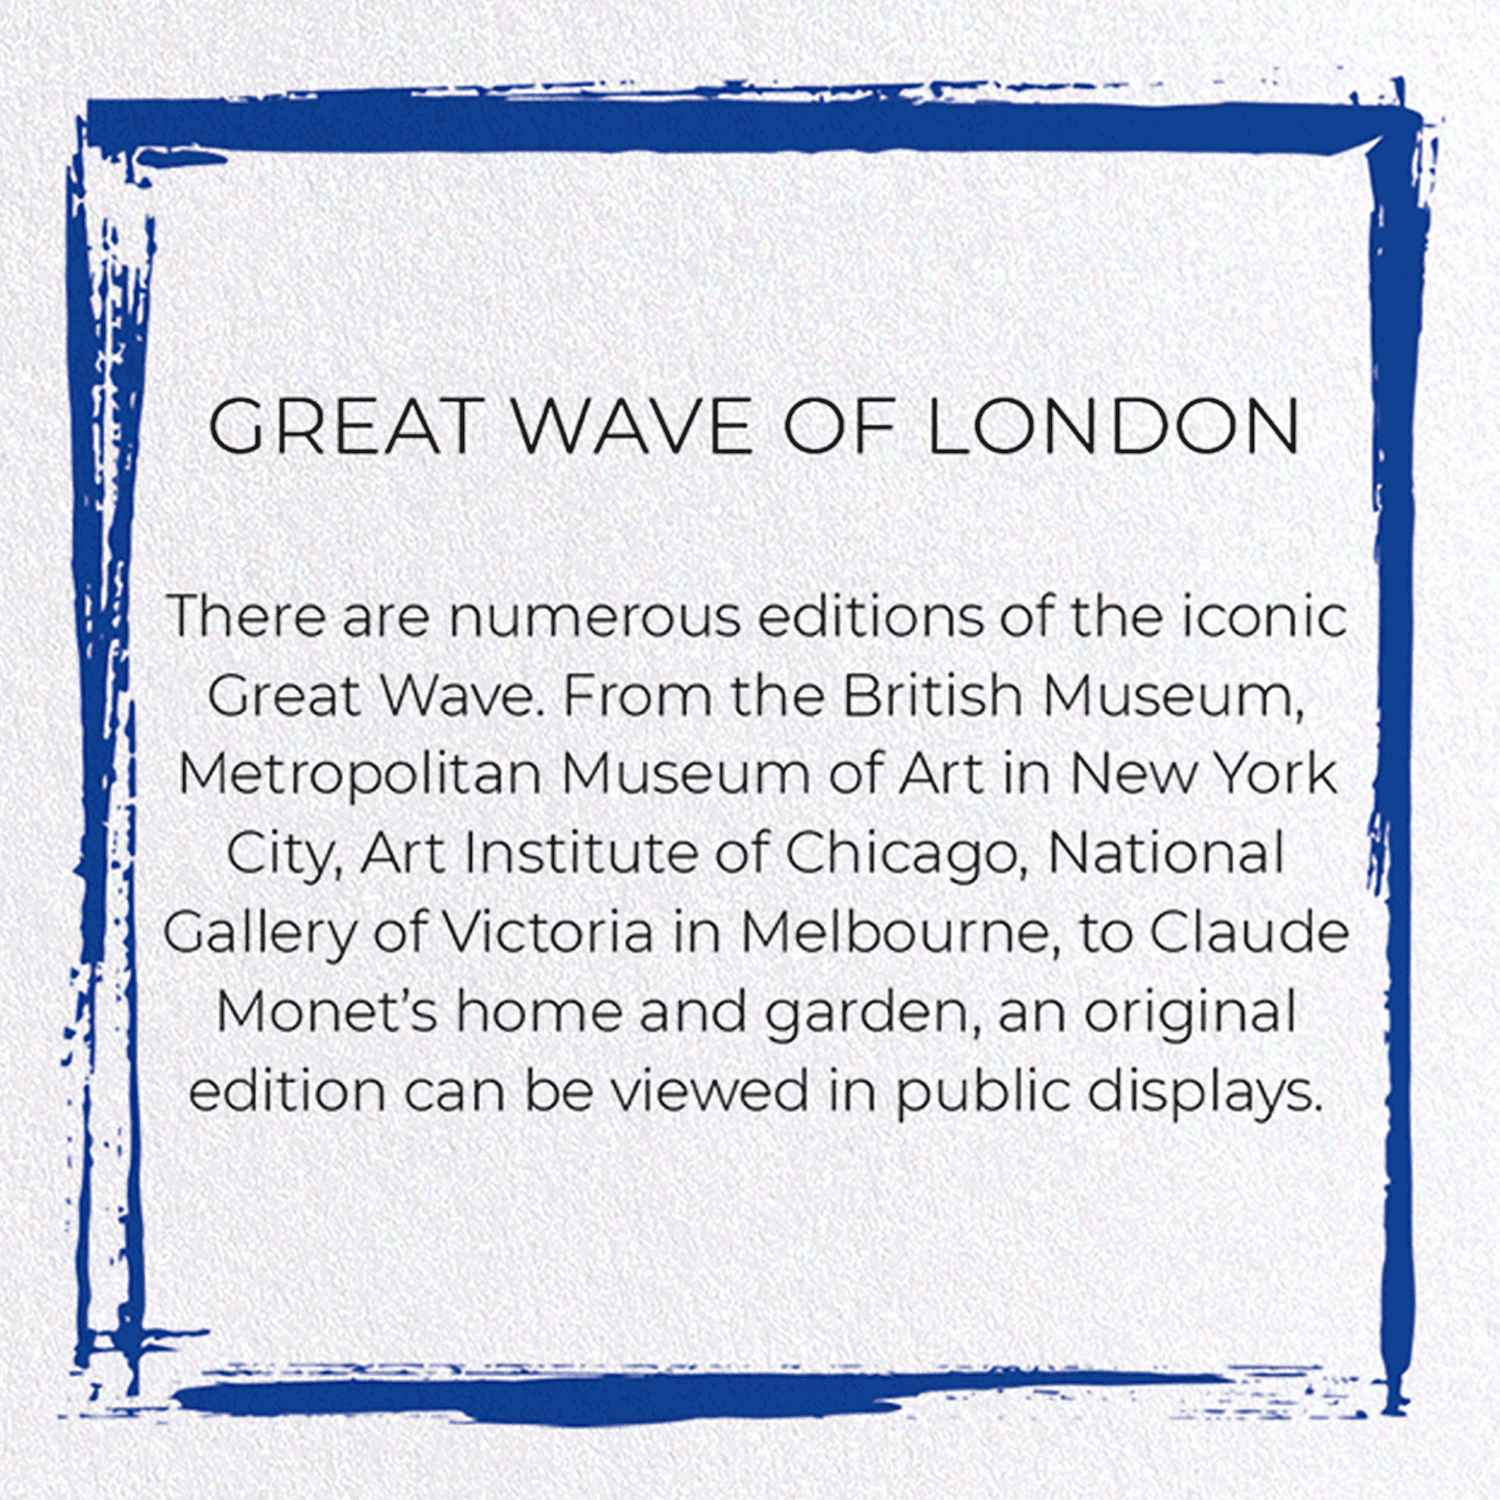 GREAT WAVE OF LONDON